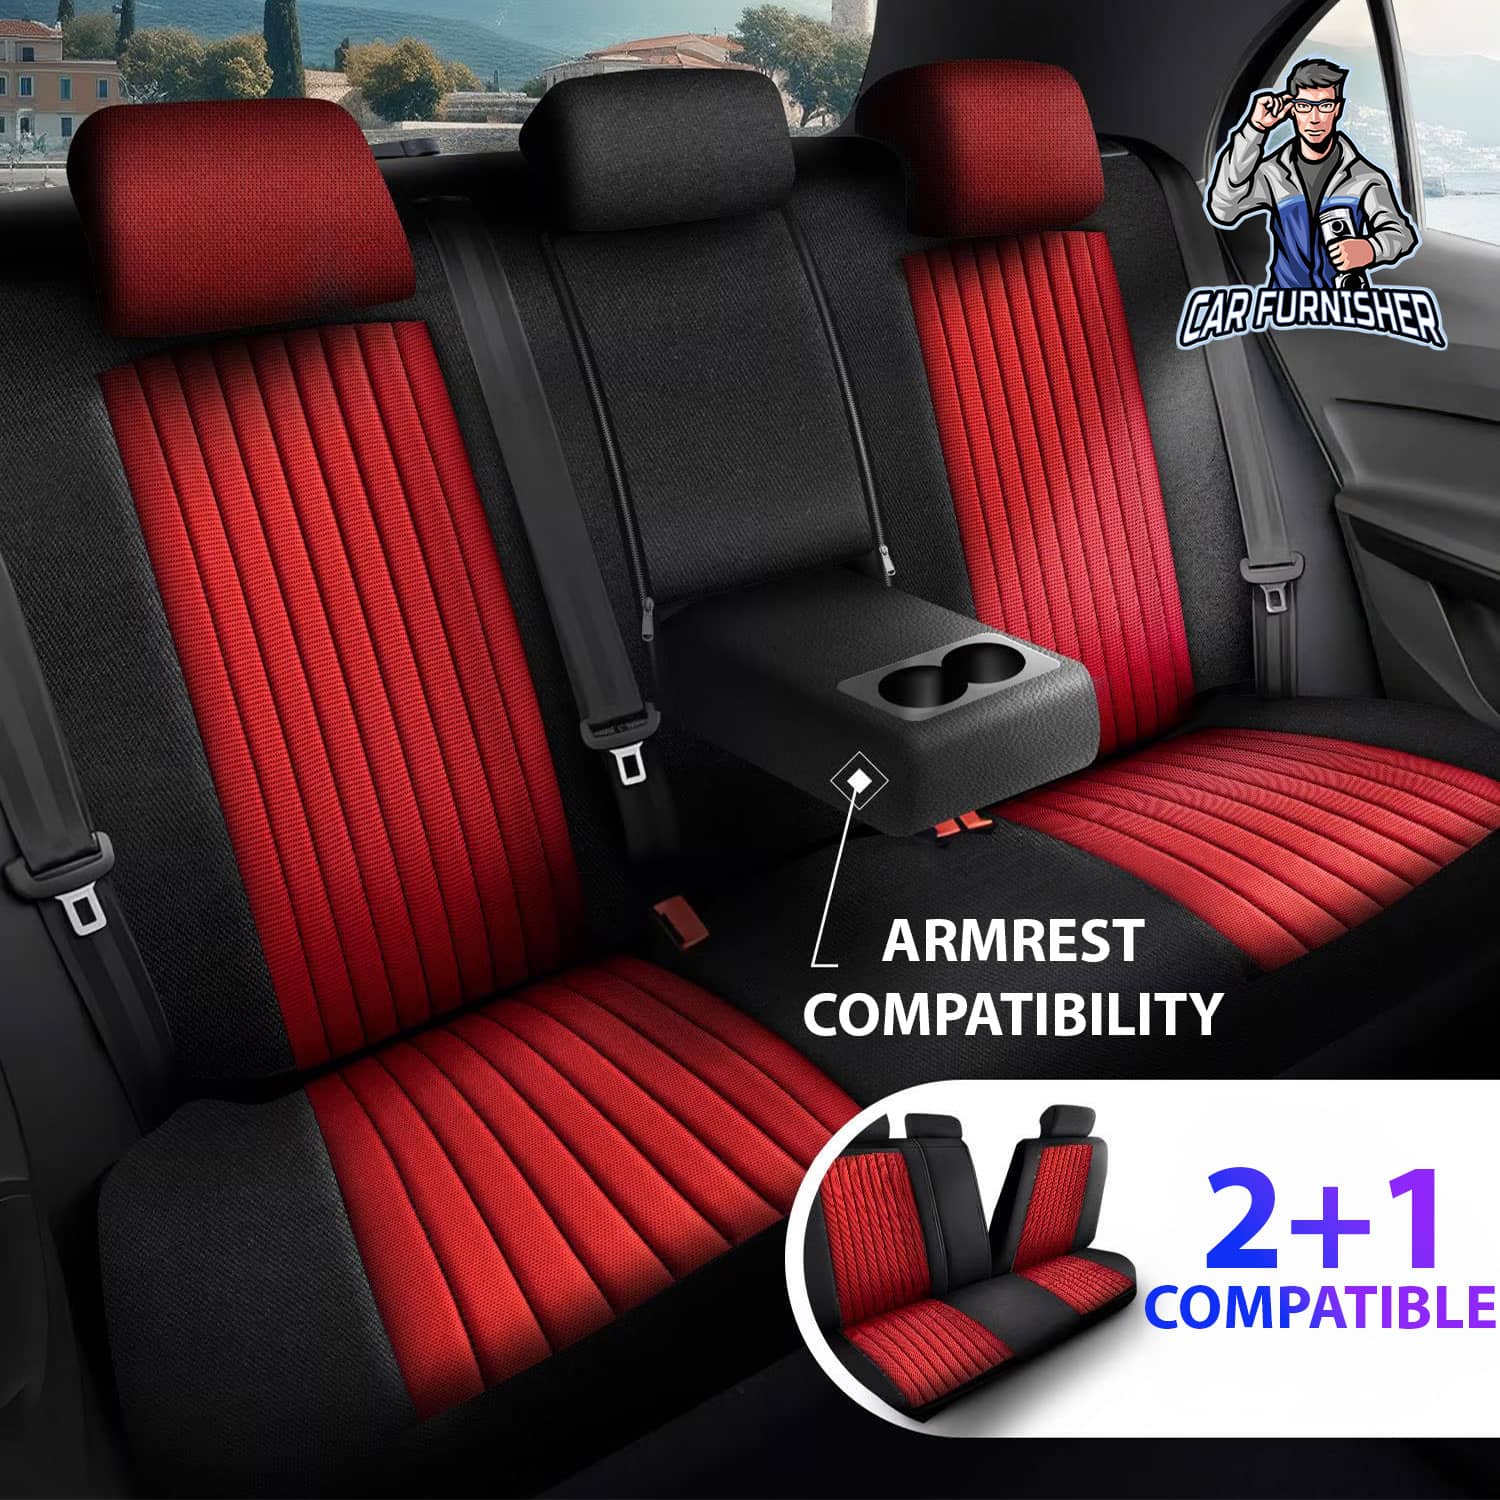 Mercedes 190 Seat Covers Prague Design Red 5 Seats + Headrests (Full Set) Leather & Pique Fabric